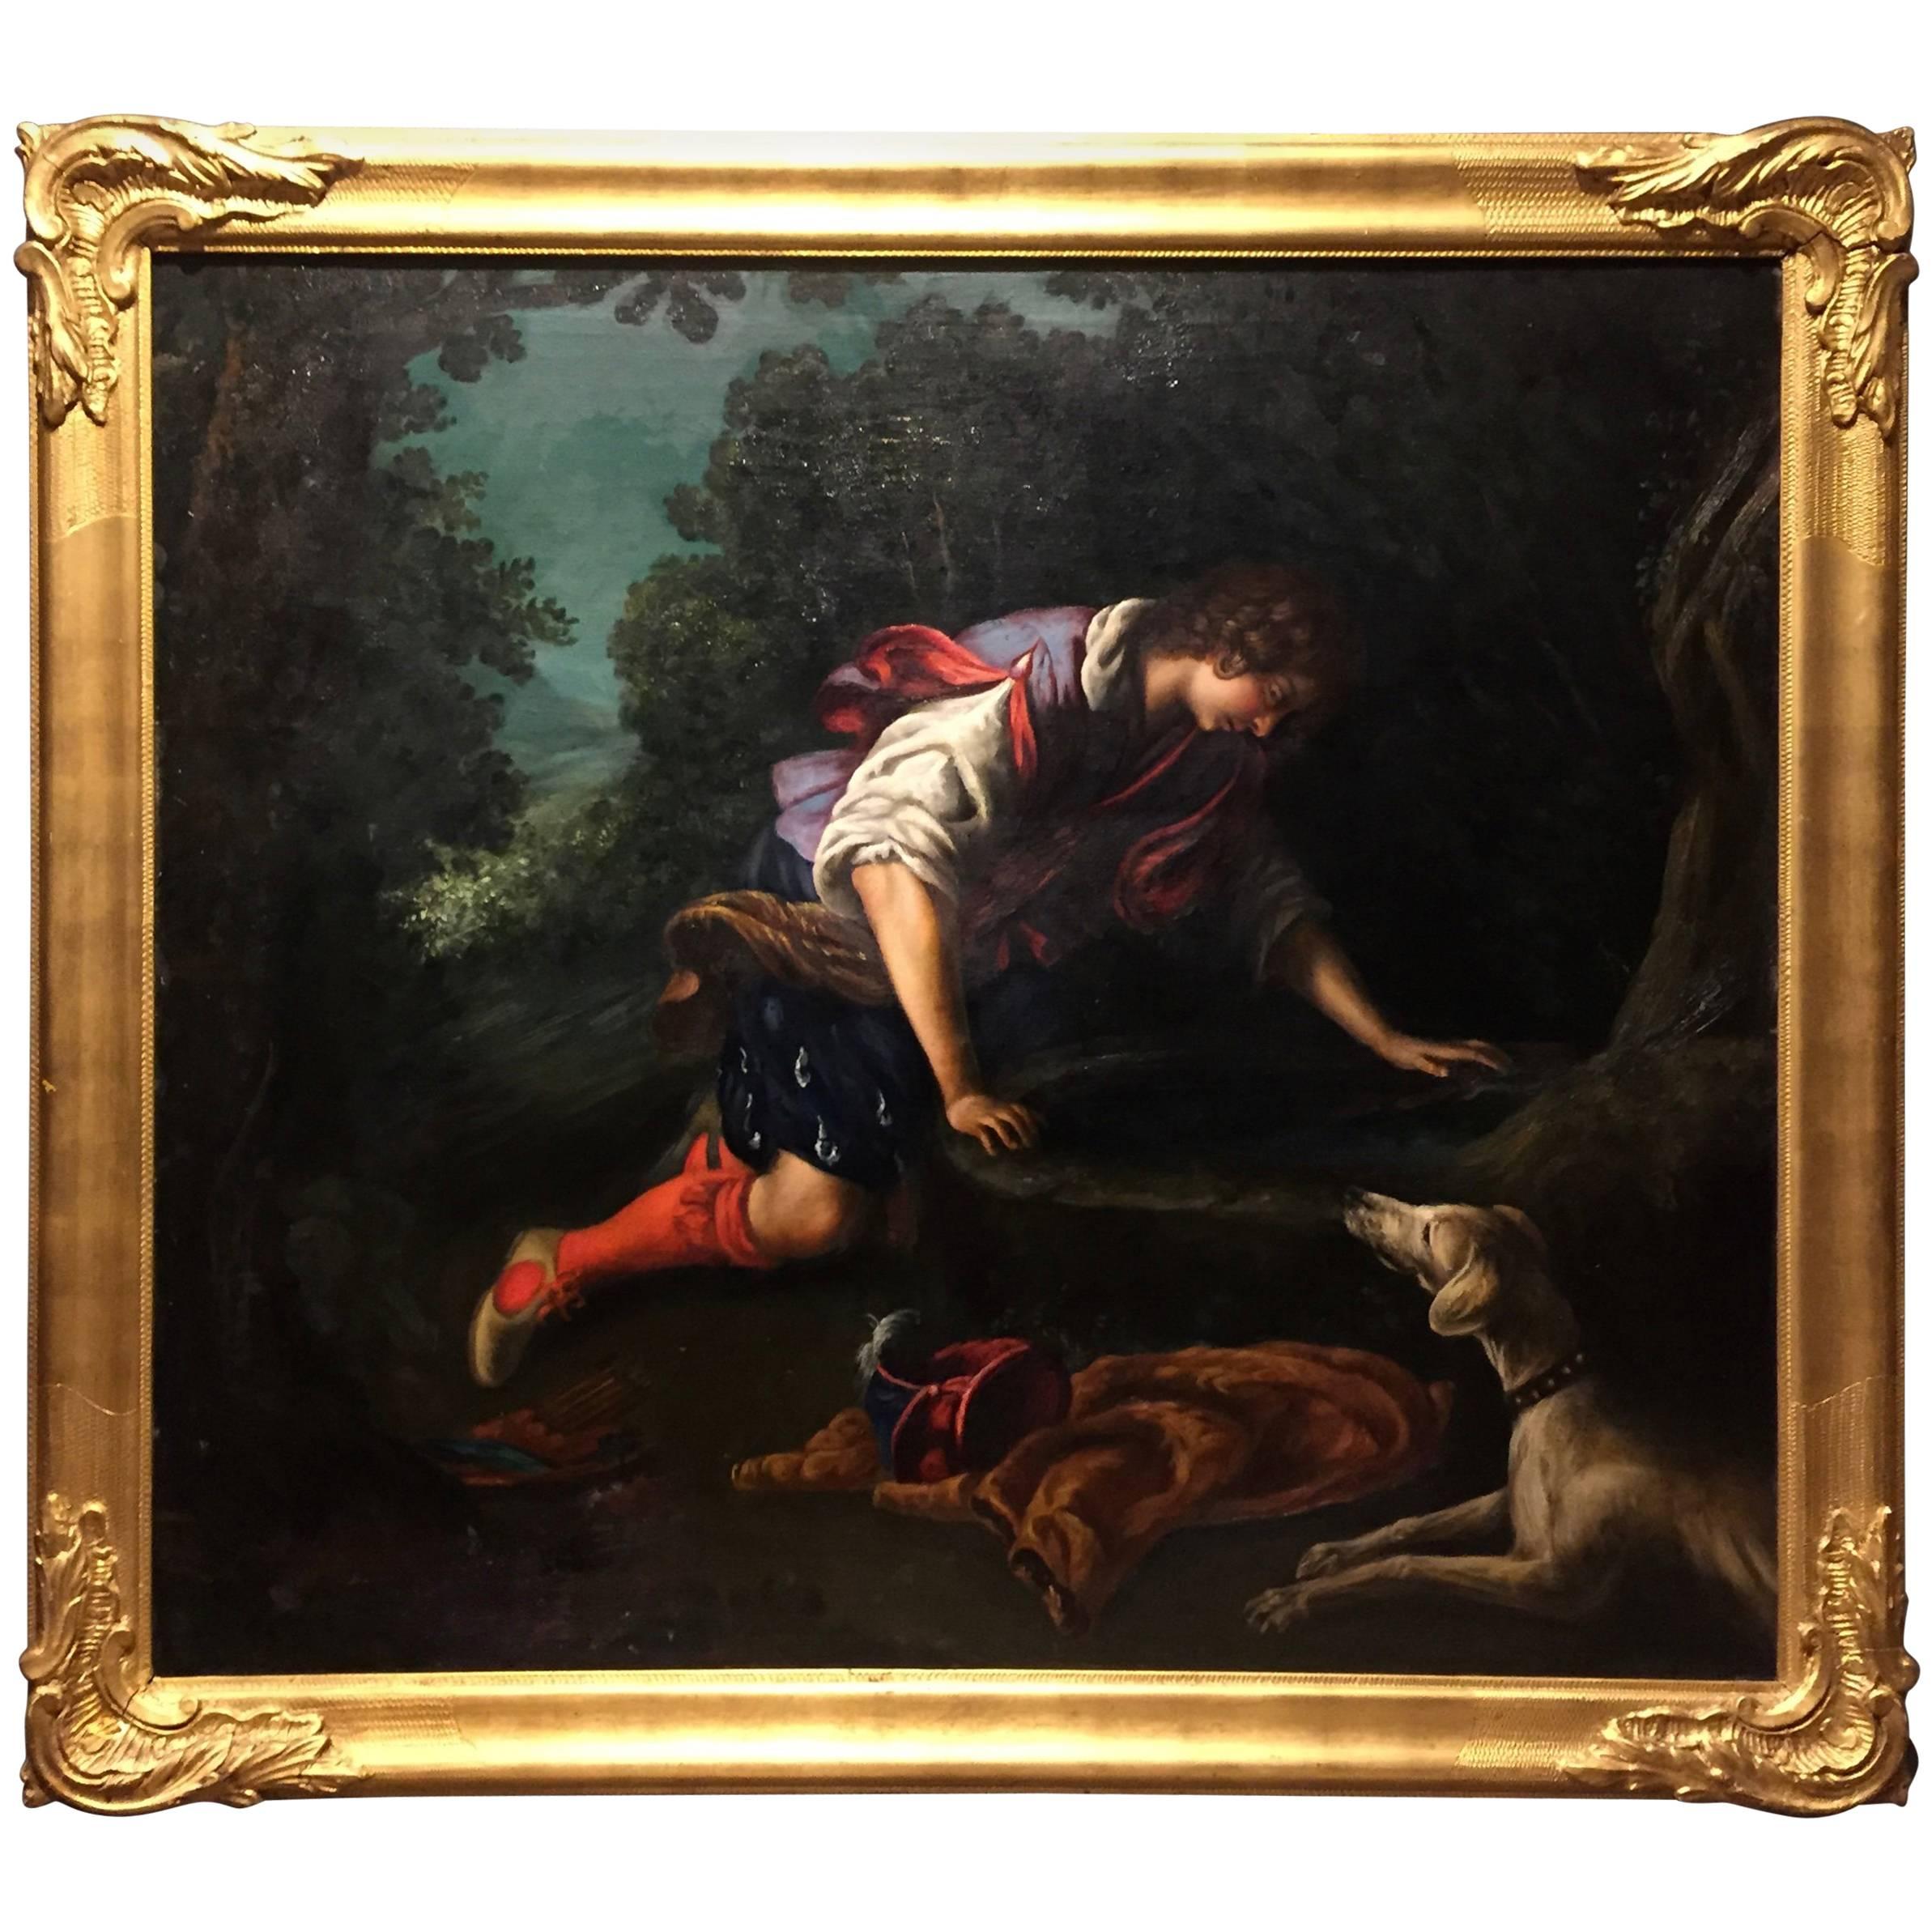 1876 Painting by Bianchini, after Francesco Curradi, "Narcissus at the Fountain" For Sale